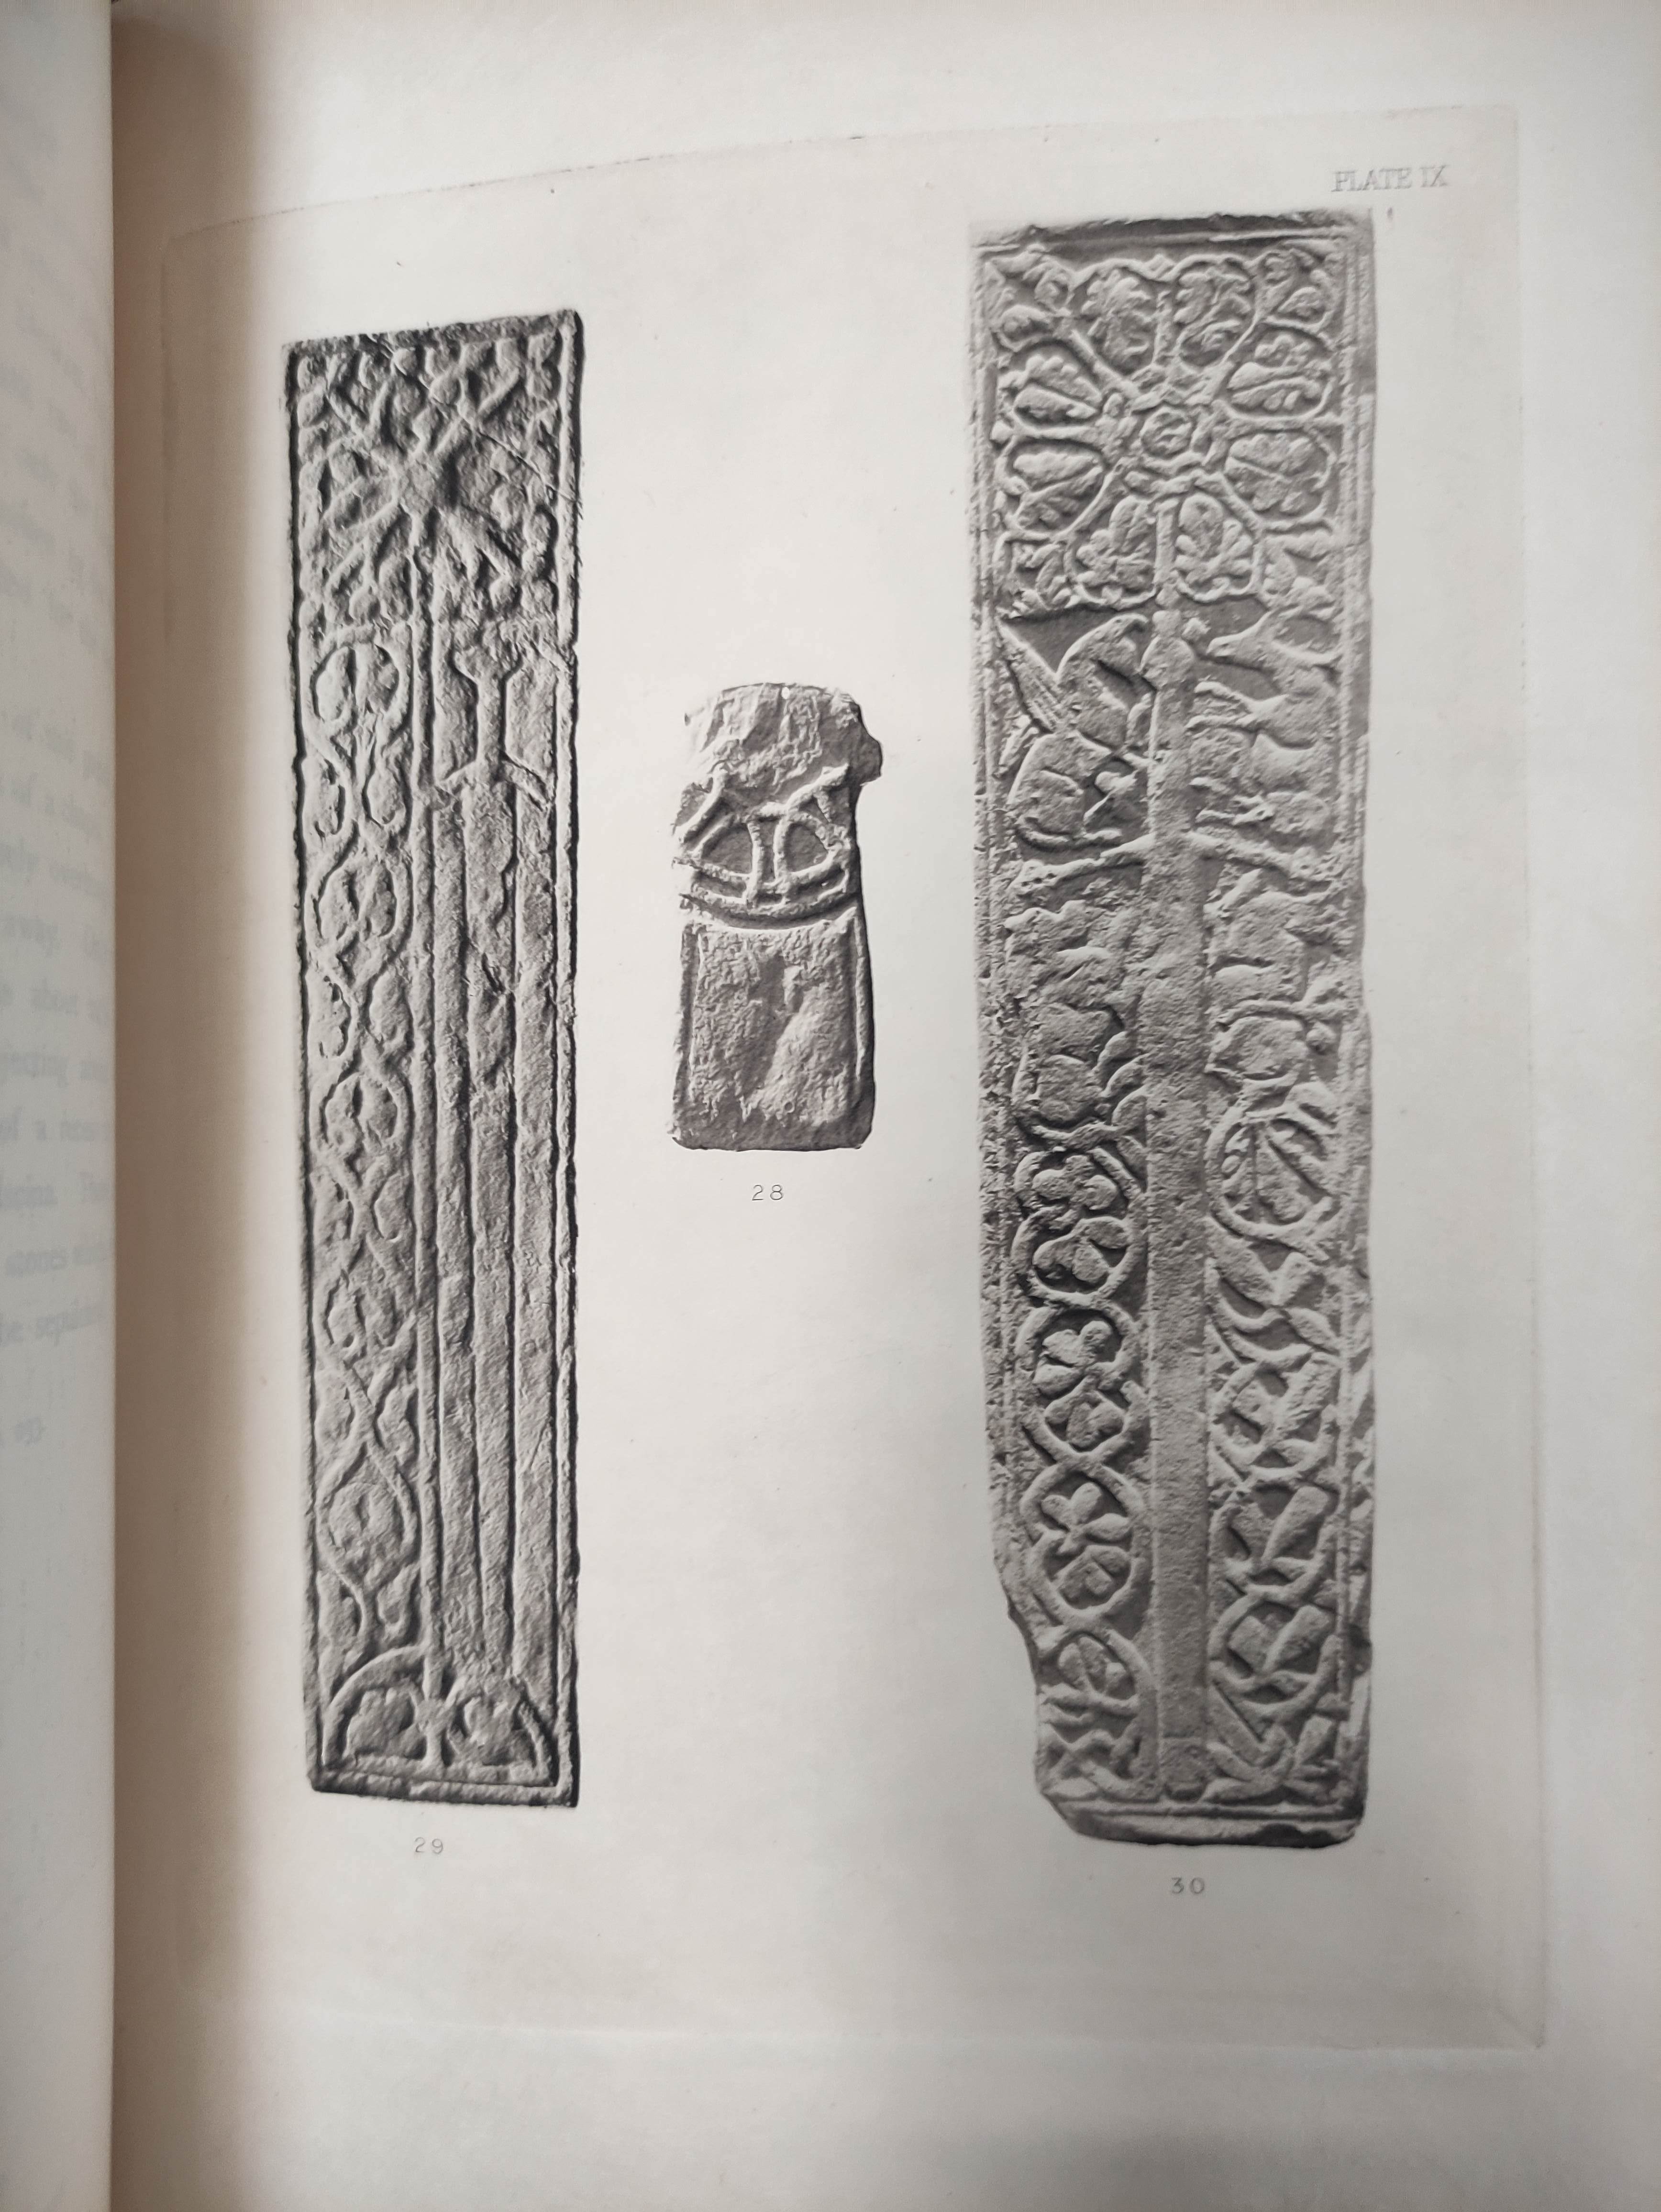 GRAHAM R. C.  The Carved Stones of Islay. Illus. Quarto. Worn orig. qtr. morocco, much internal - Image 7 of 15